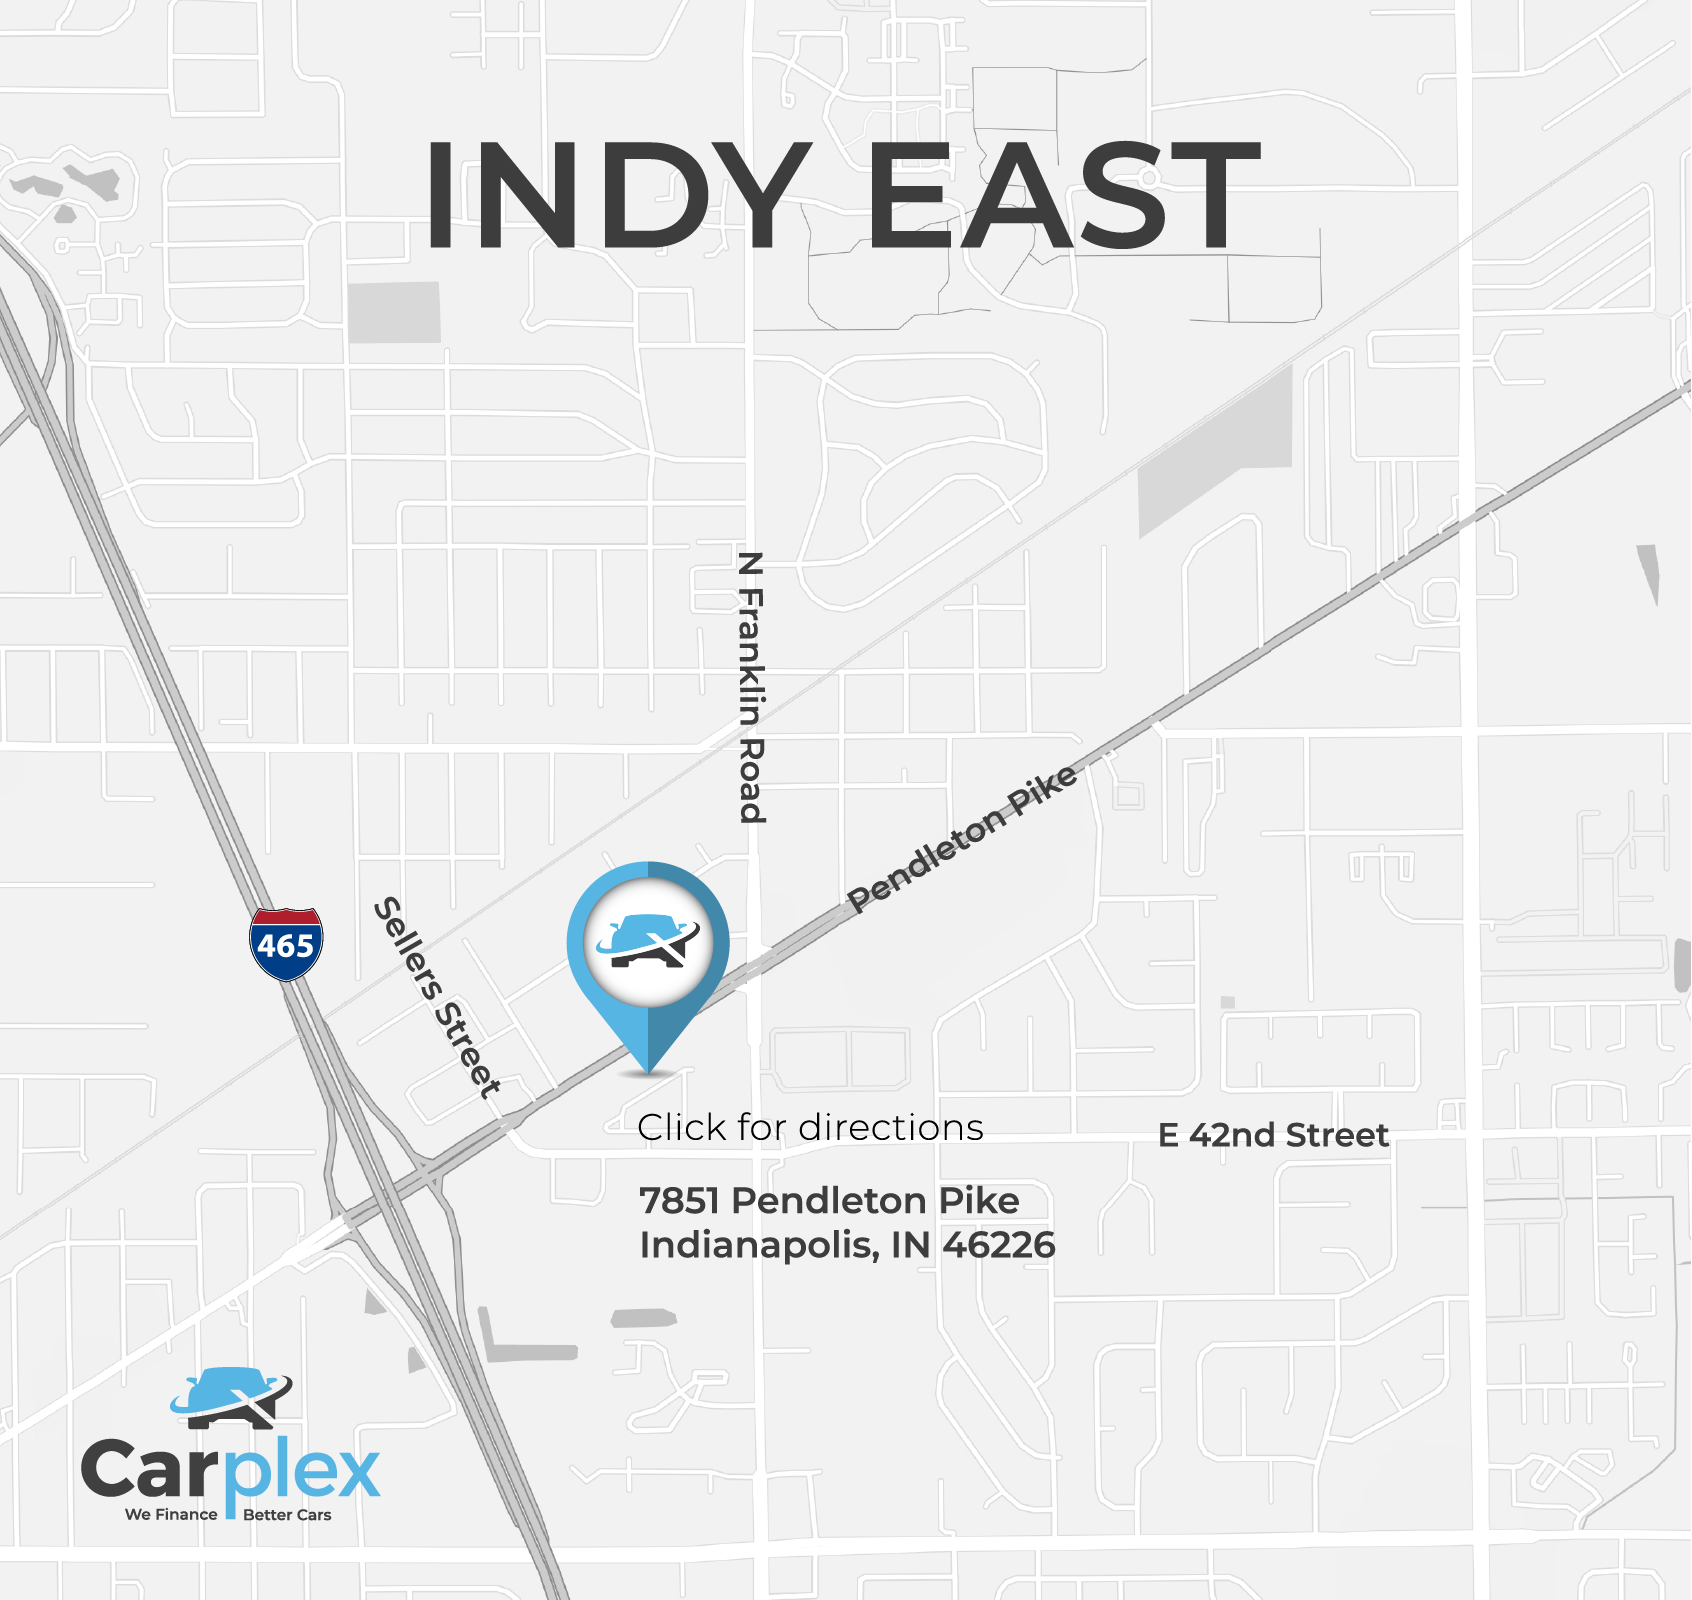 CP_Map Indy East